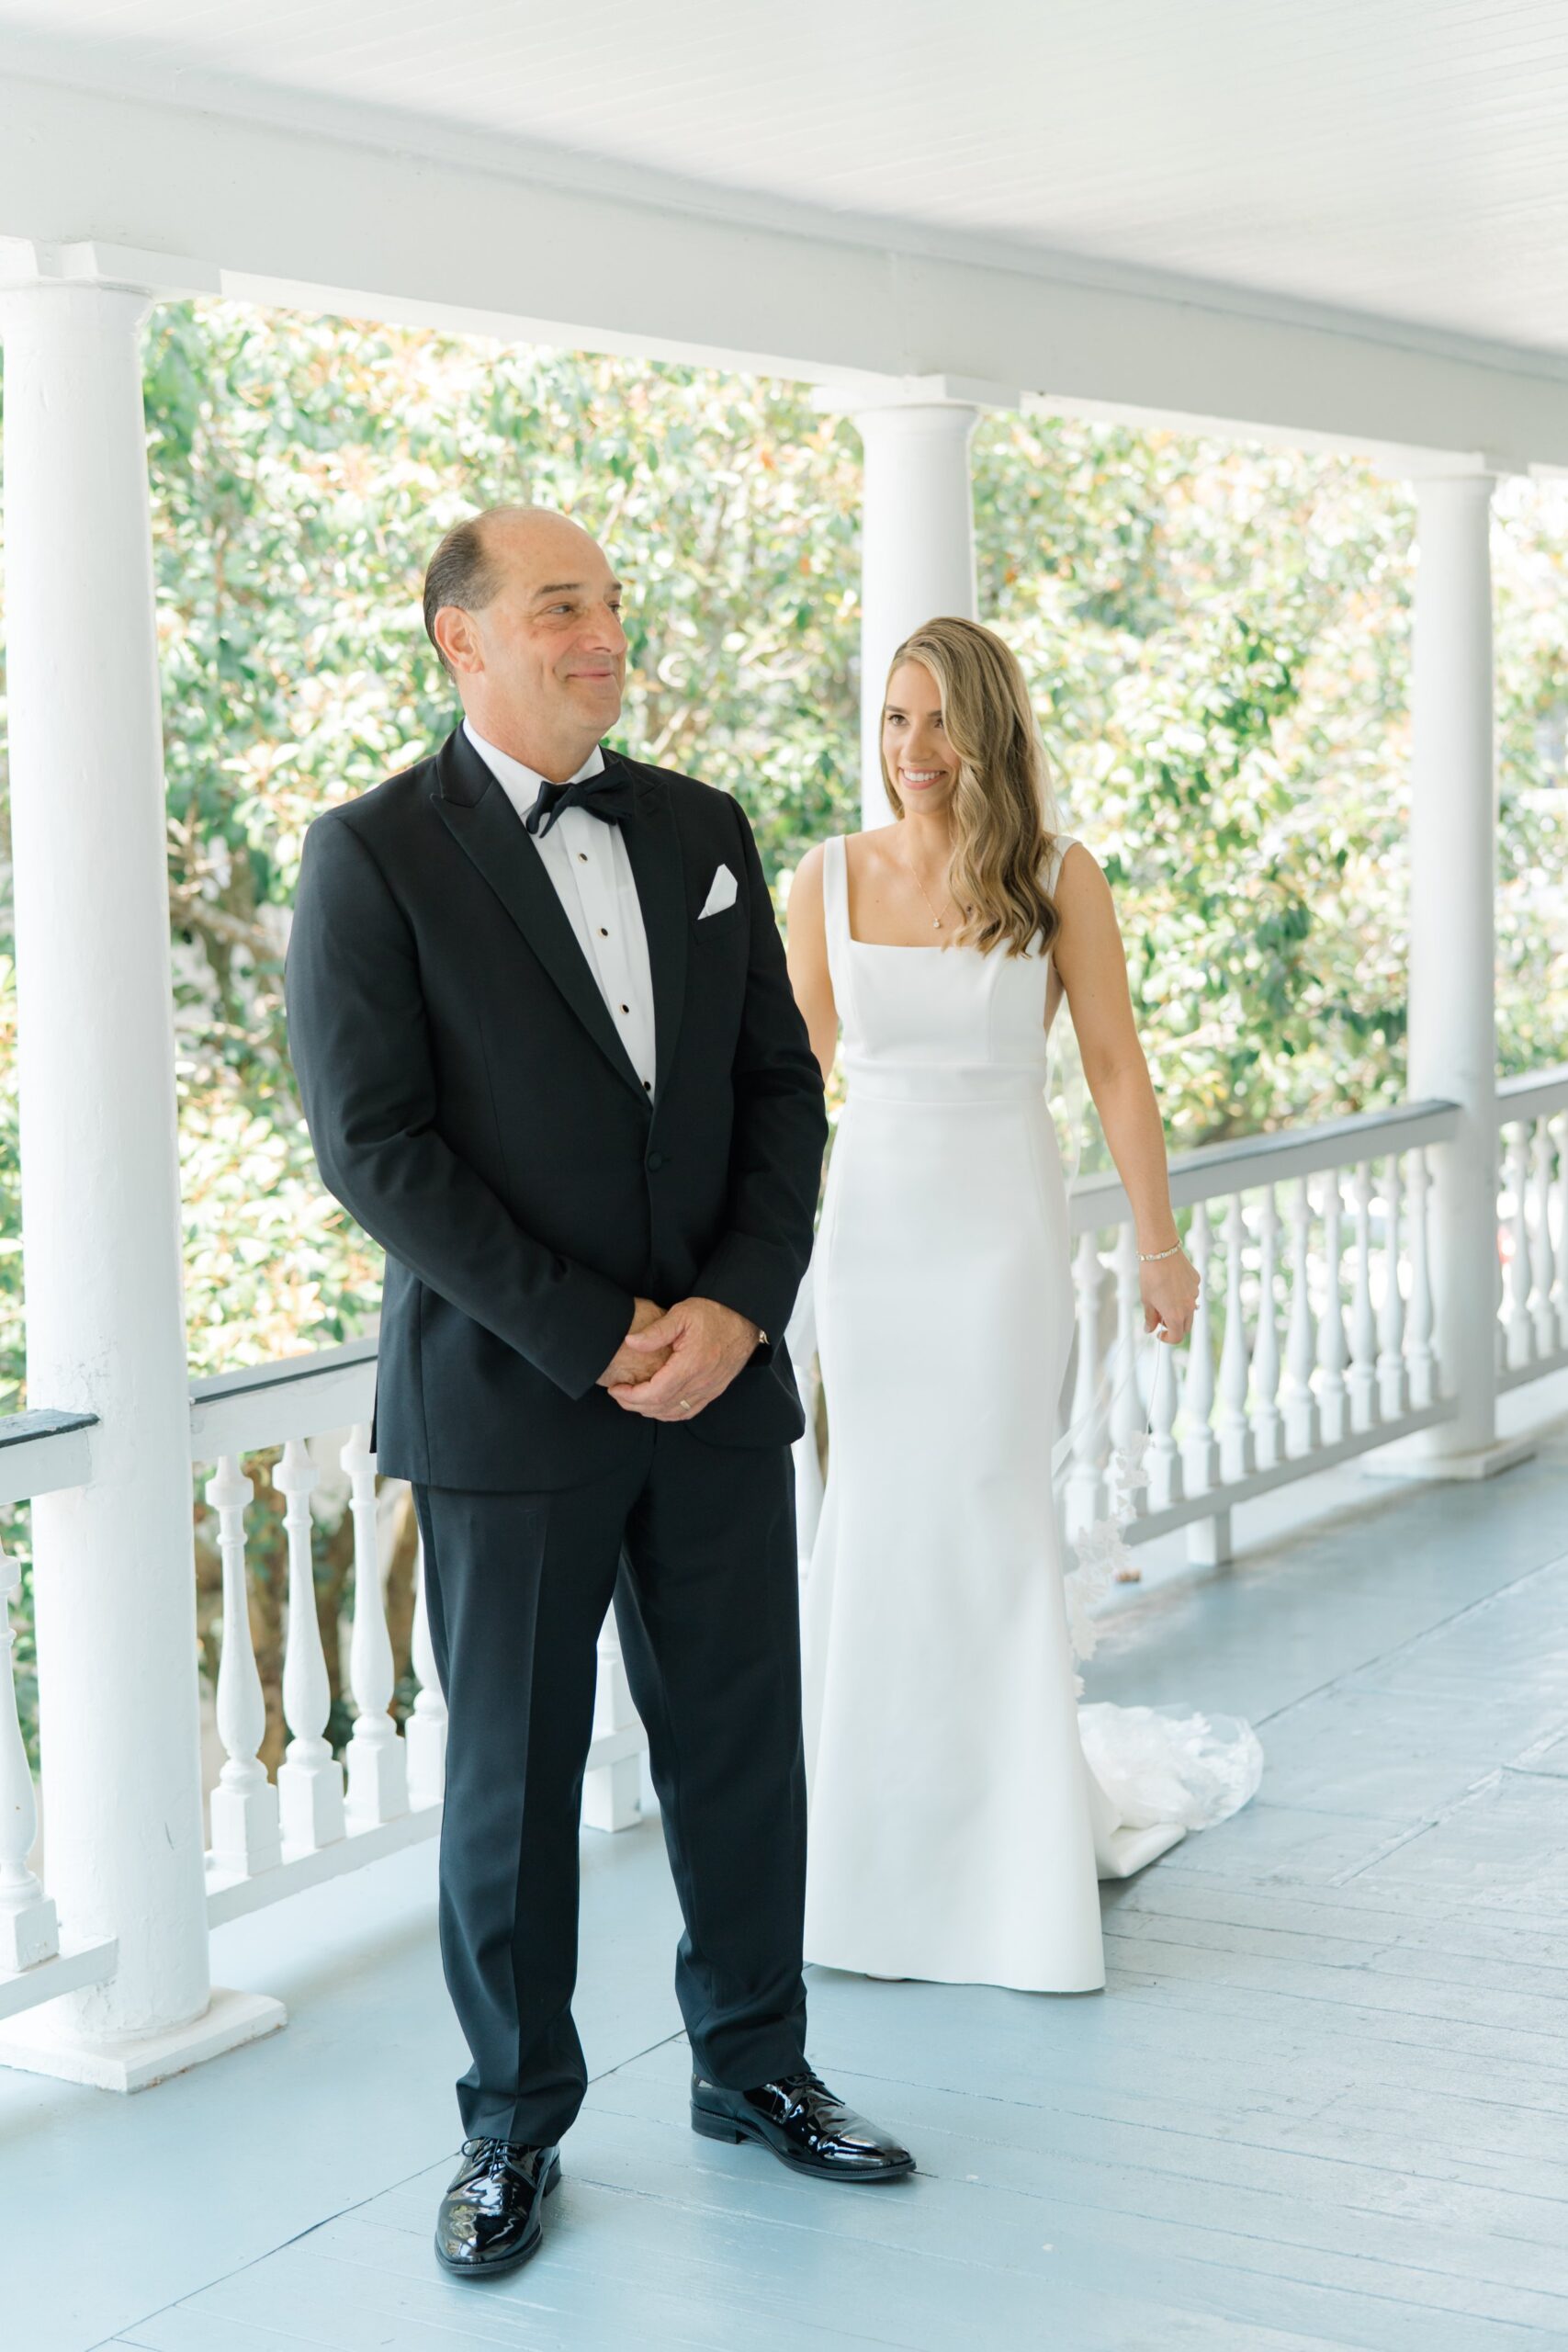 Bride walks up to dad for father daughter first look.